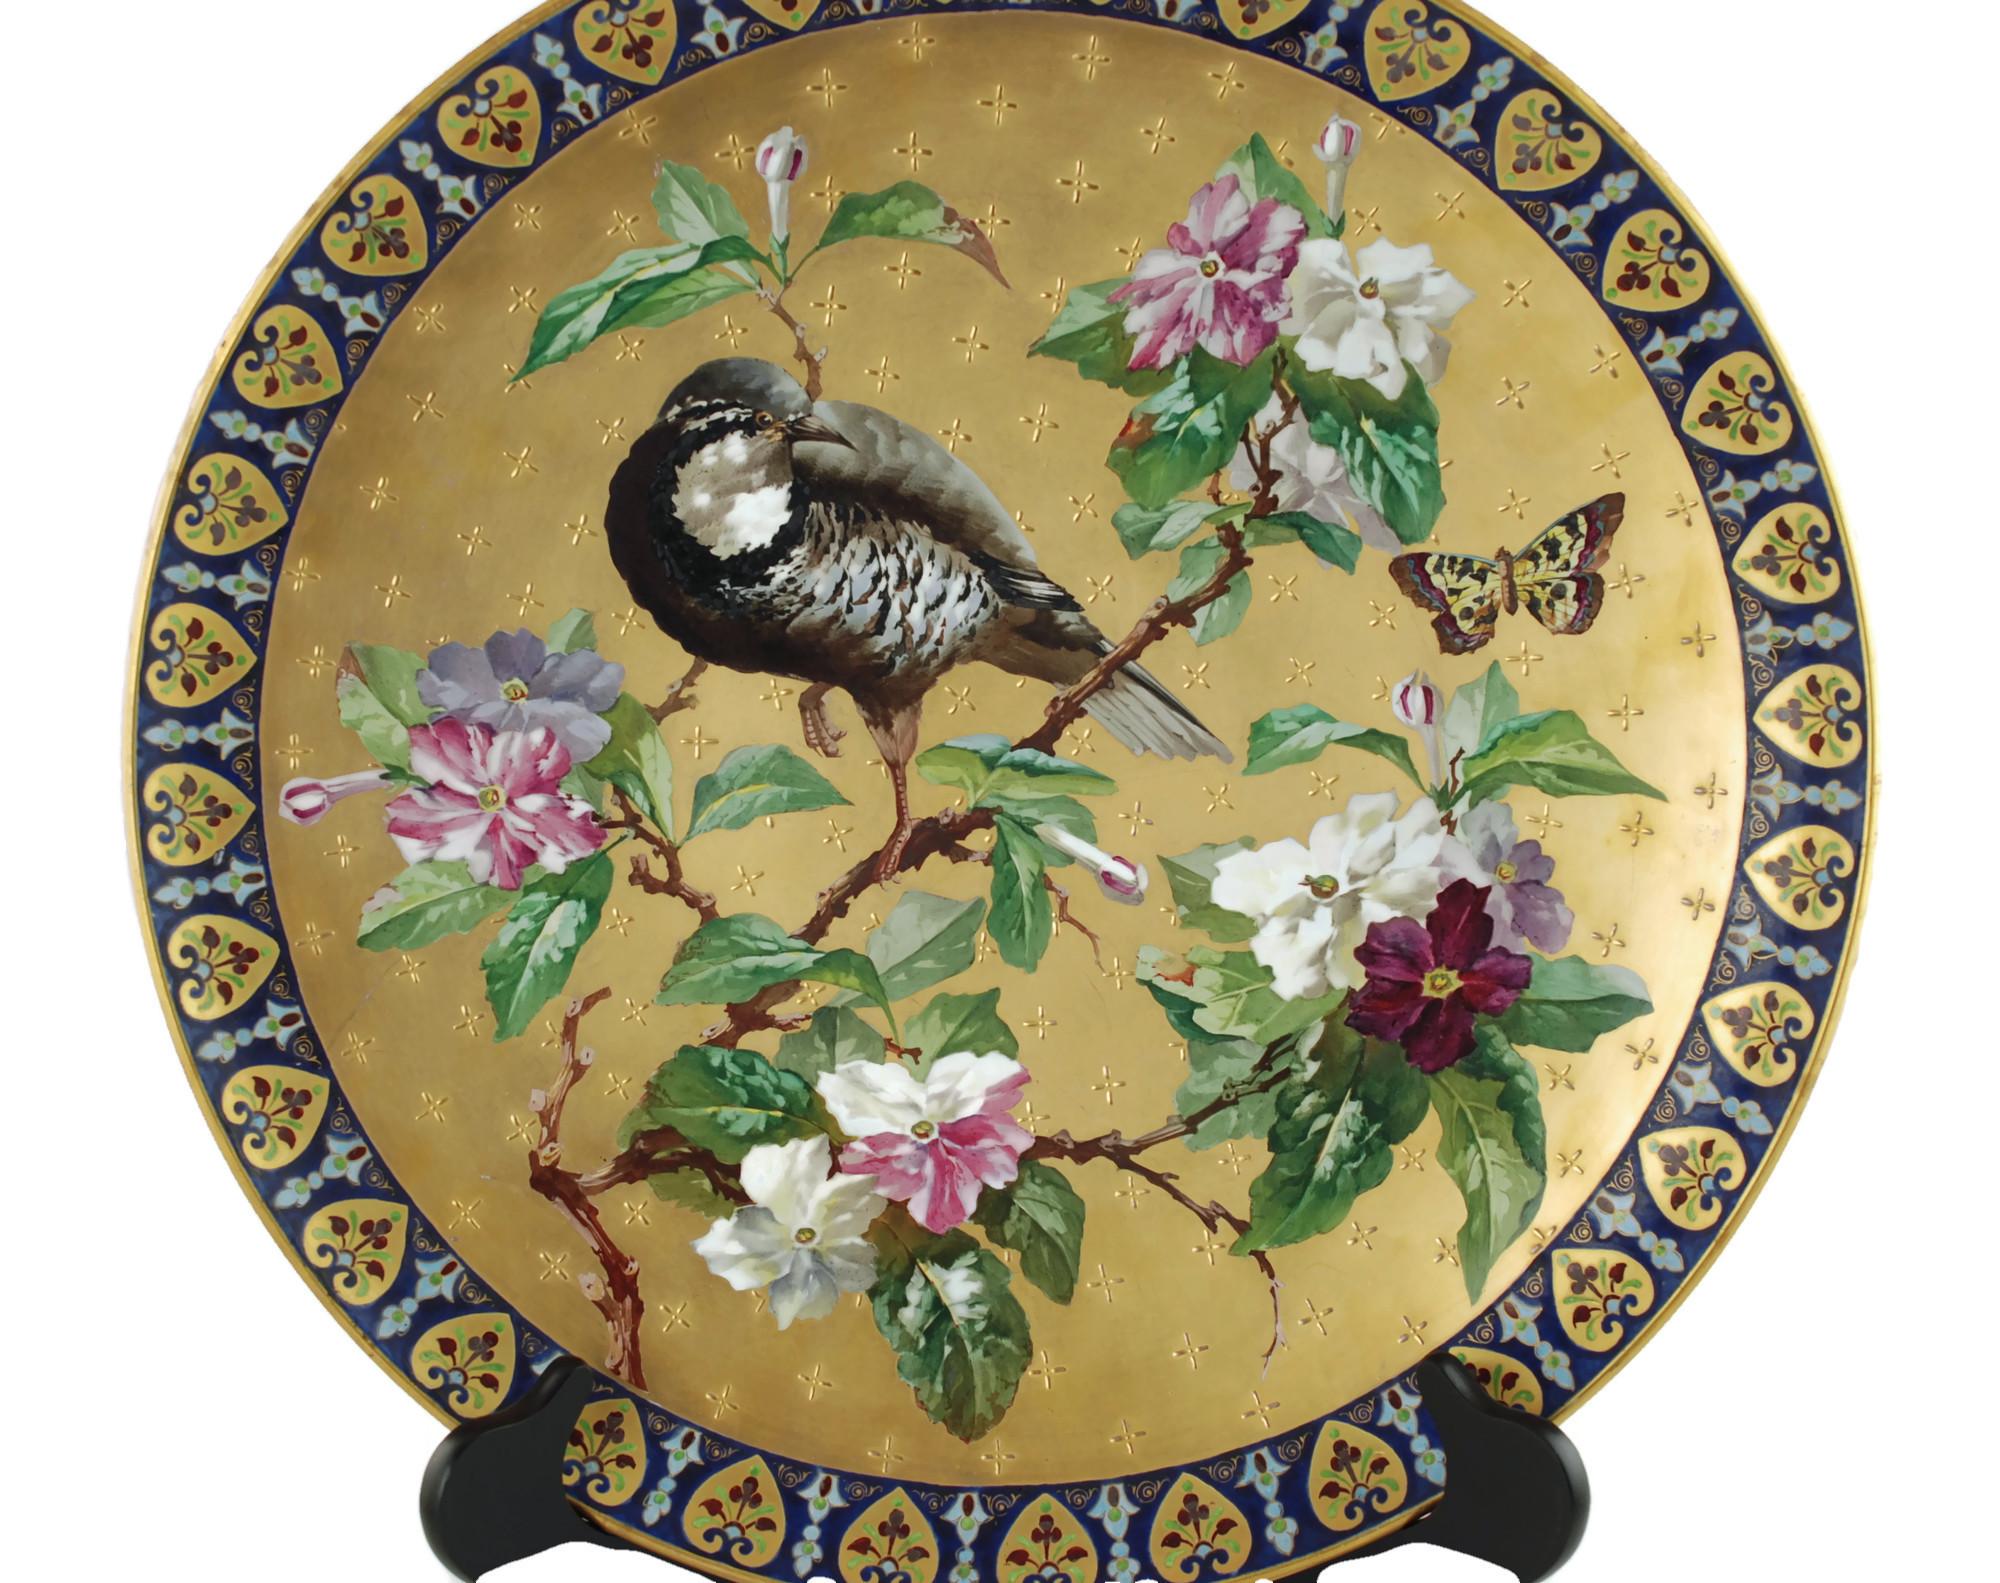 This outstanding hand painted 19th century French ceramic charger was made by Hautin Boulenger & Cie at Creil & Montereau. The highly detailed Aesthetic Movement charger features polychrome decoration depicting a Japanese quail perched in a